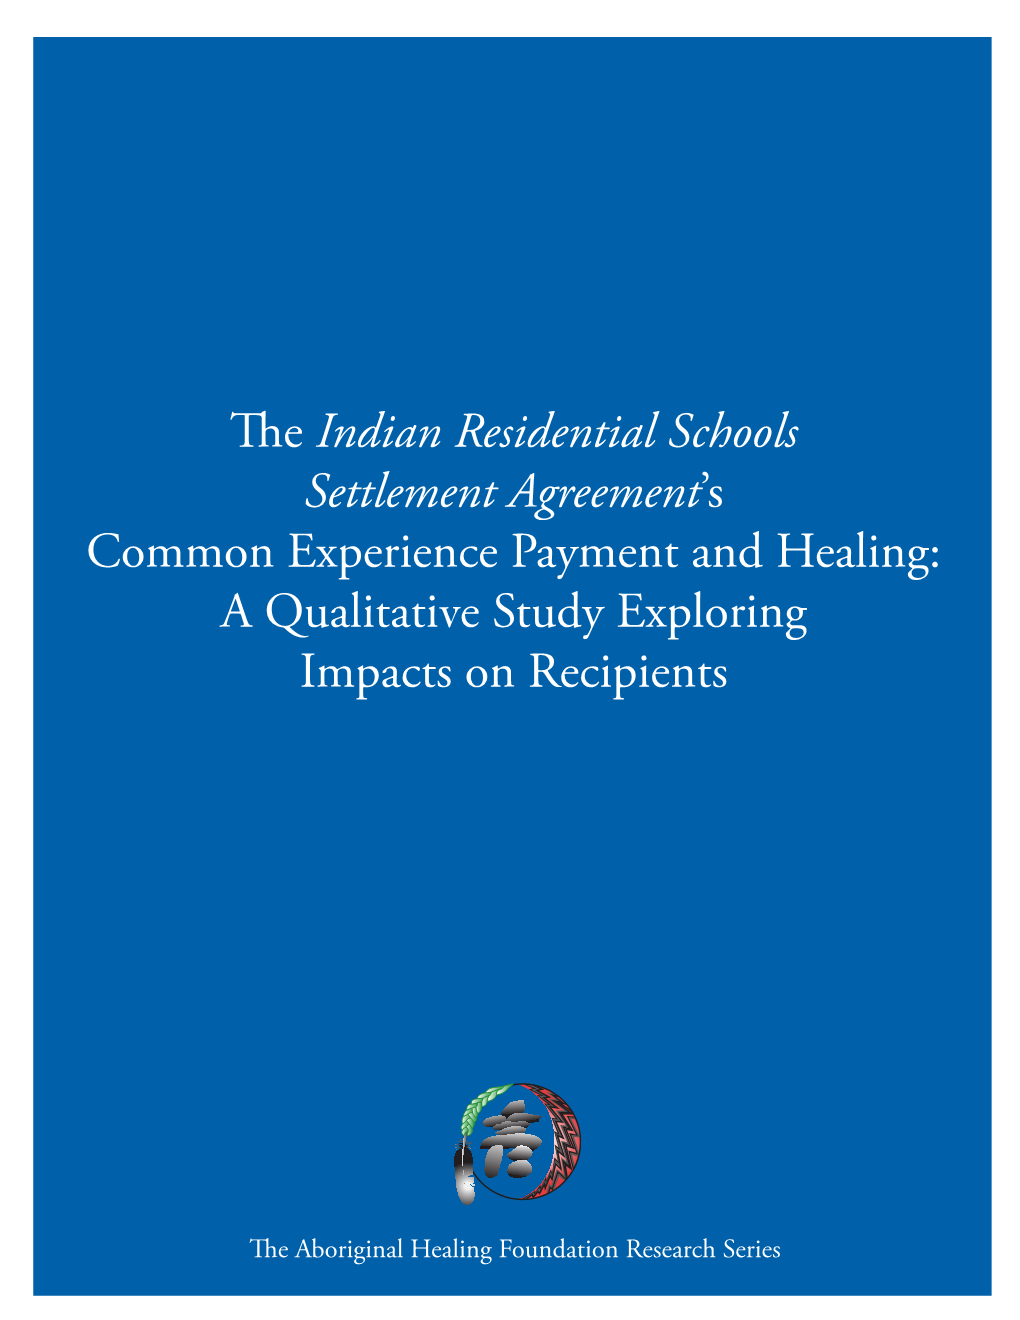 The Indian Residential Schools Settlement Agreement's Common